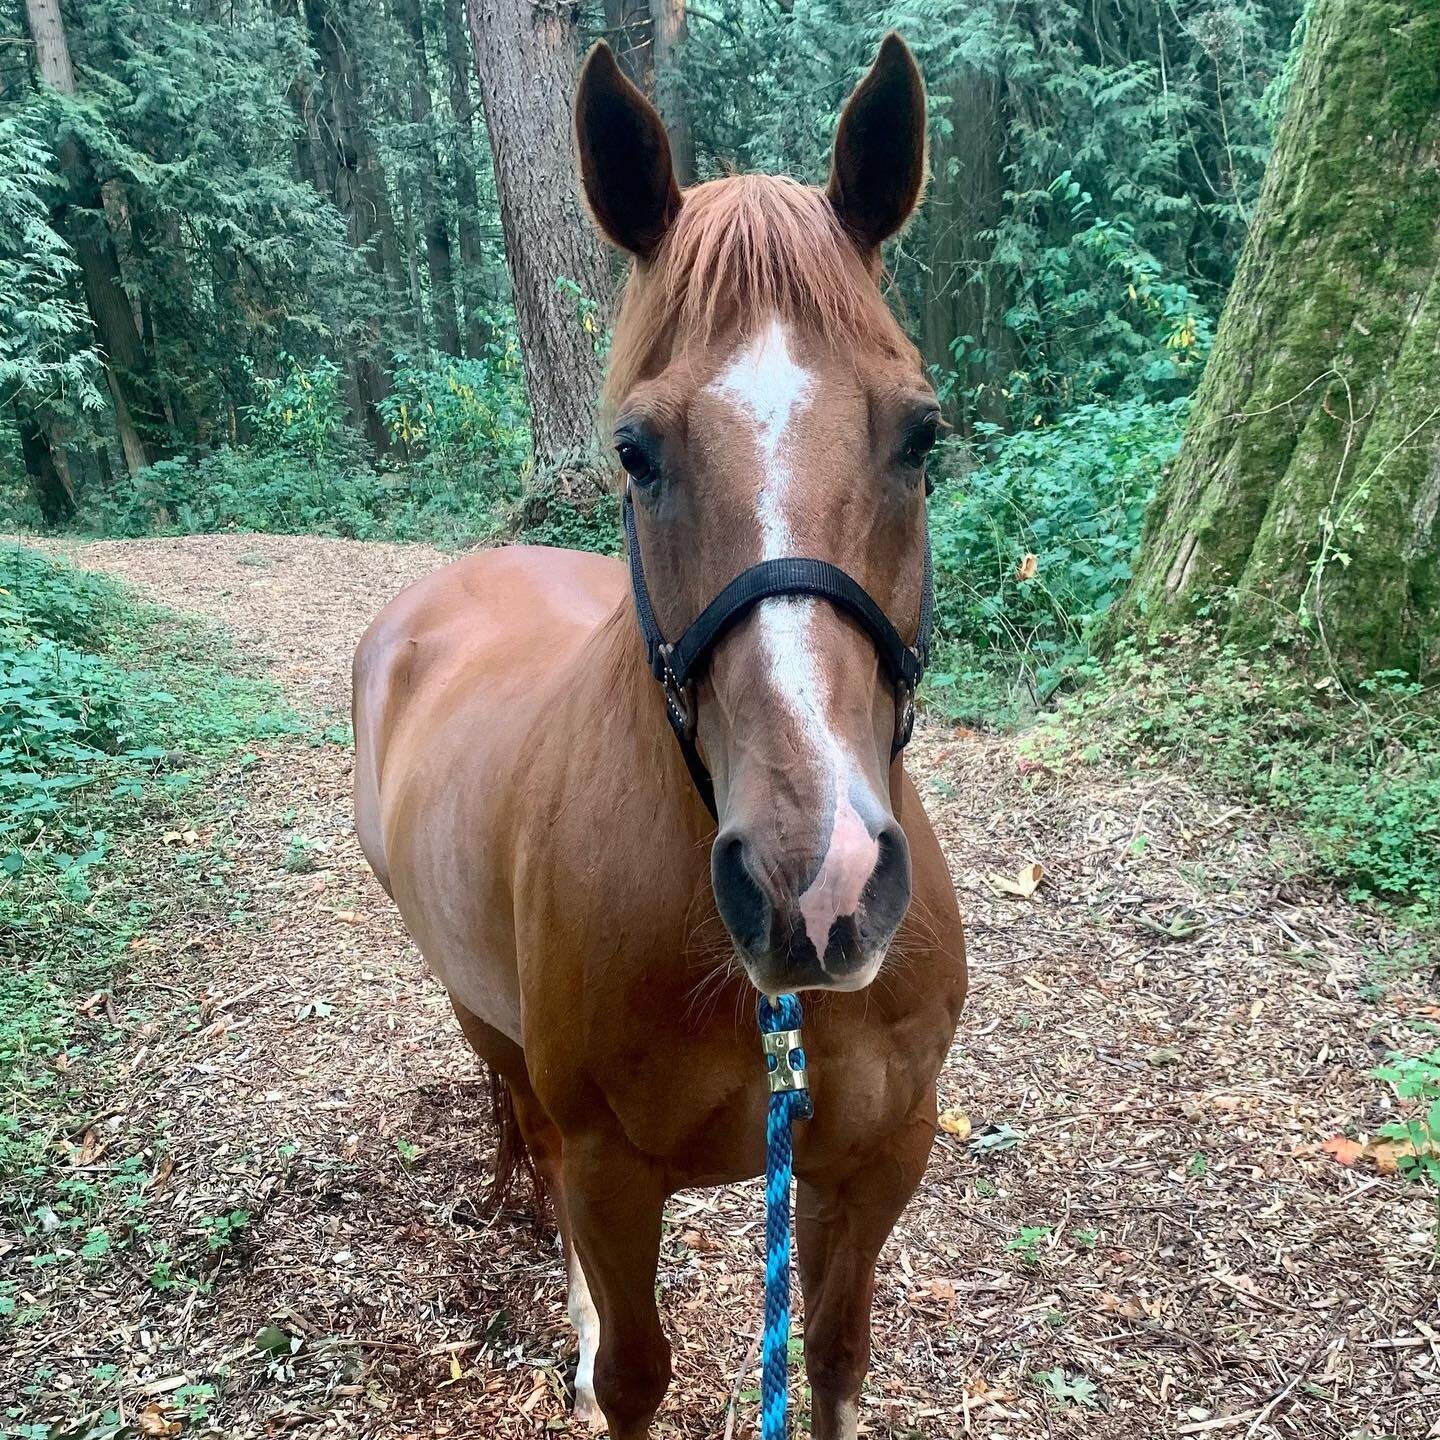 Happy 21st Birthday Scoot!!!!! 🎉

Though we don't know the date of his birthday, today was lovingly chosen for him because it is also #NationalScooterDay. 

Thank you to his owner for leasing us this handsome guy ❤️

#happybirthday #twentyone #celeb